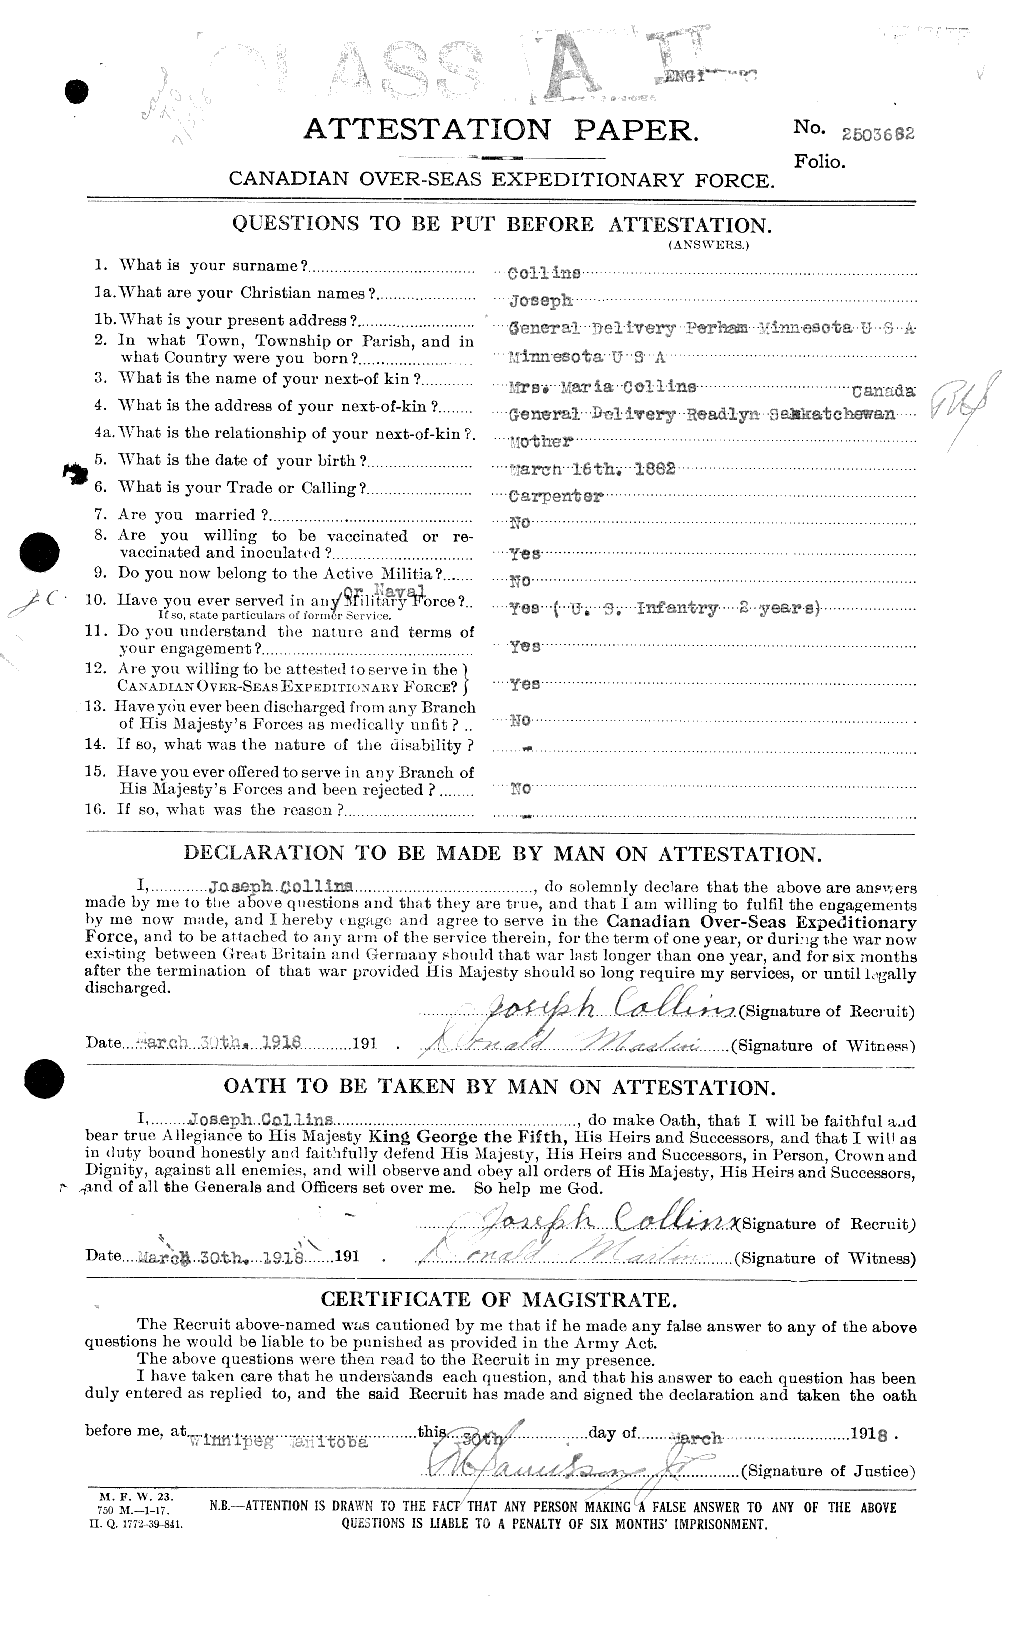 Personnel Records of the First World War - CEF 034403a